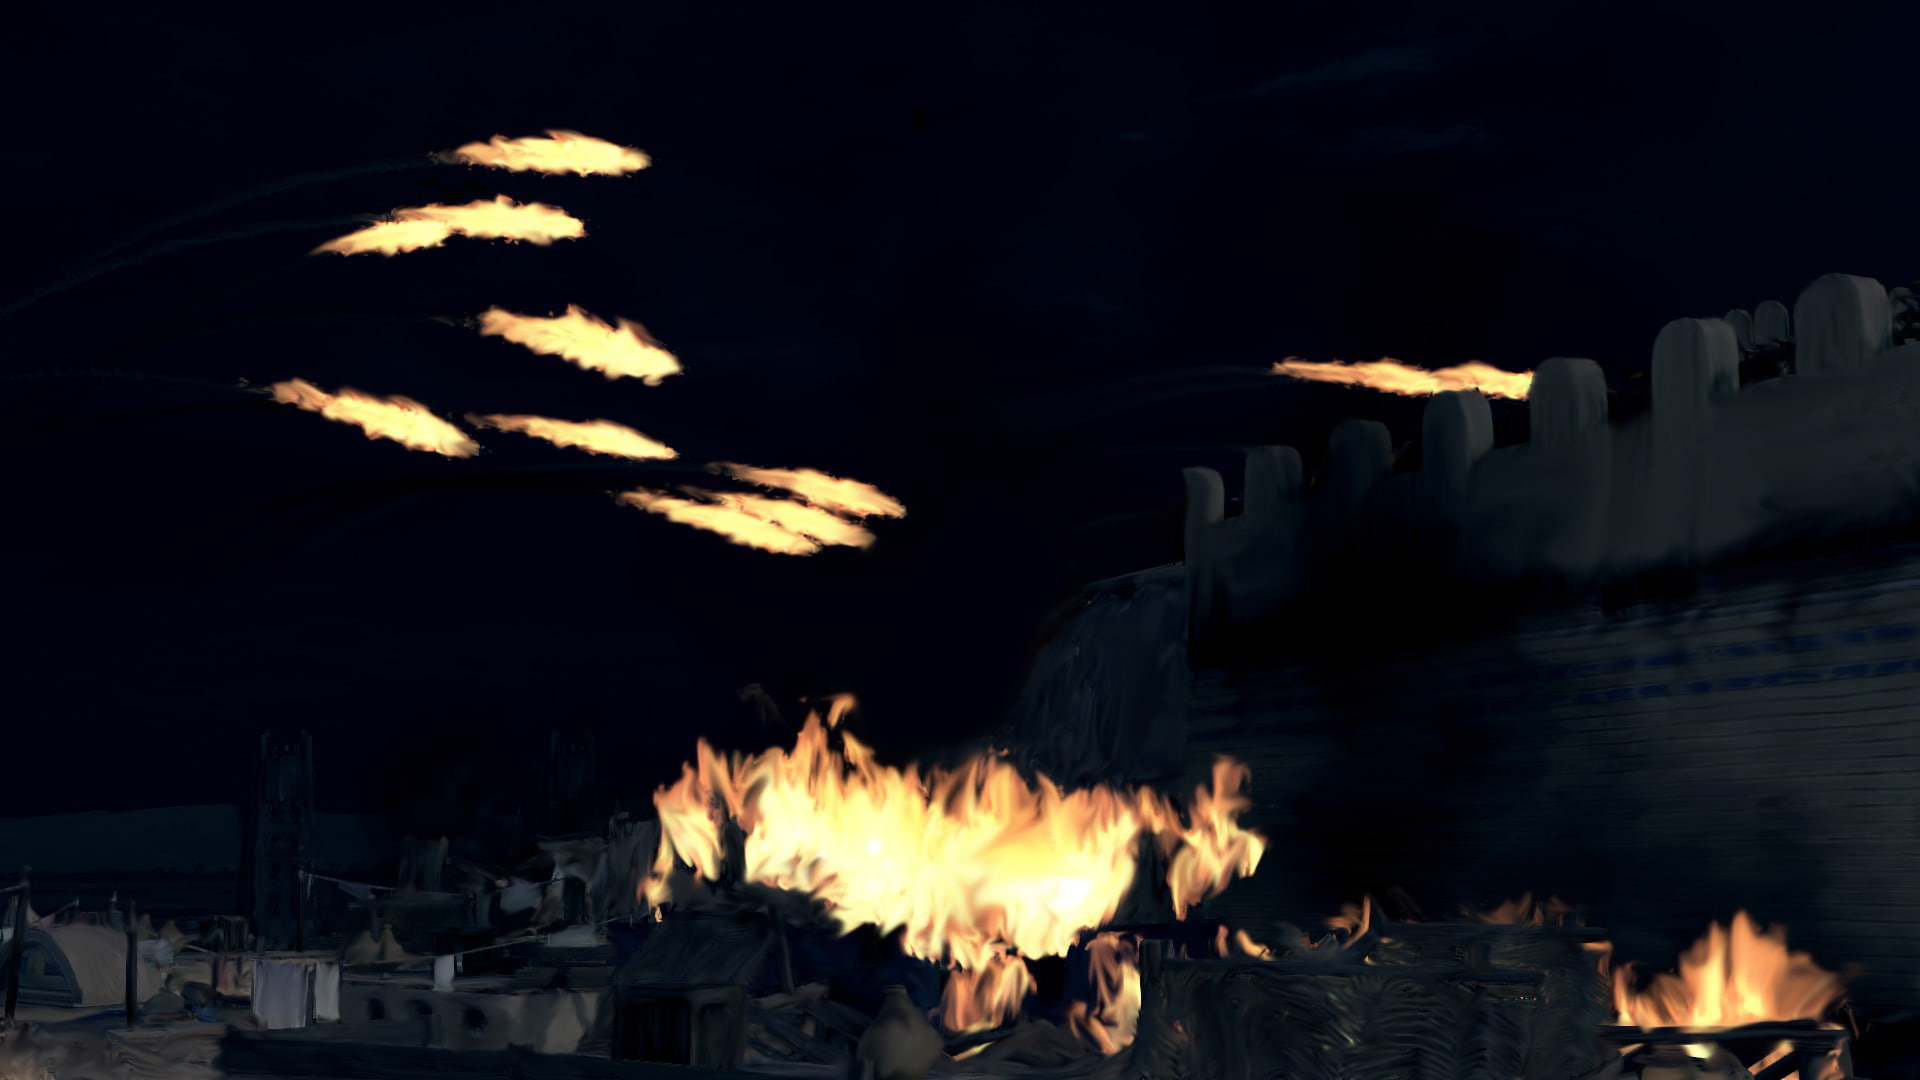 Photoshop, medieval, siege, fire, sketches, night, the Darkness